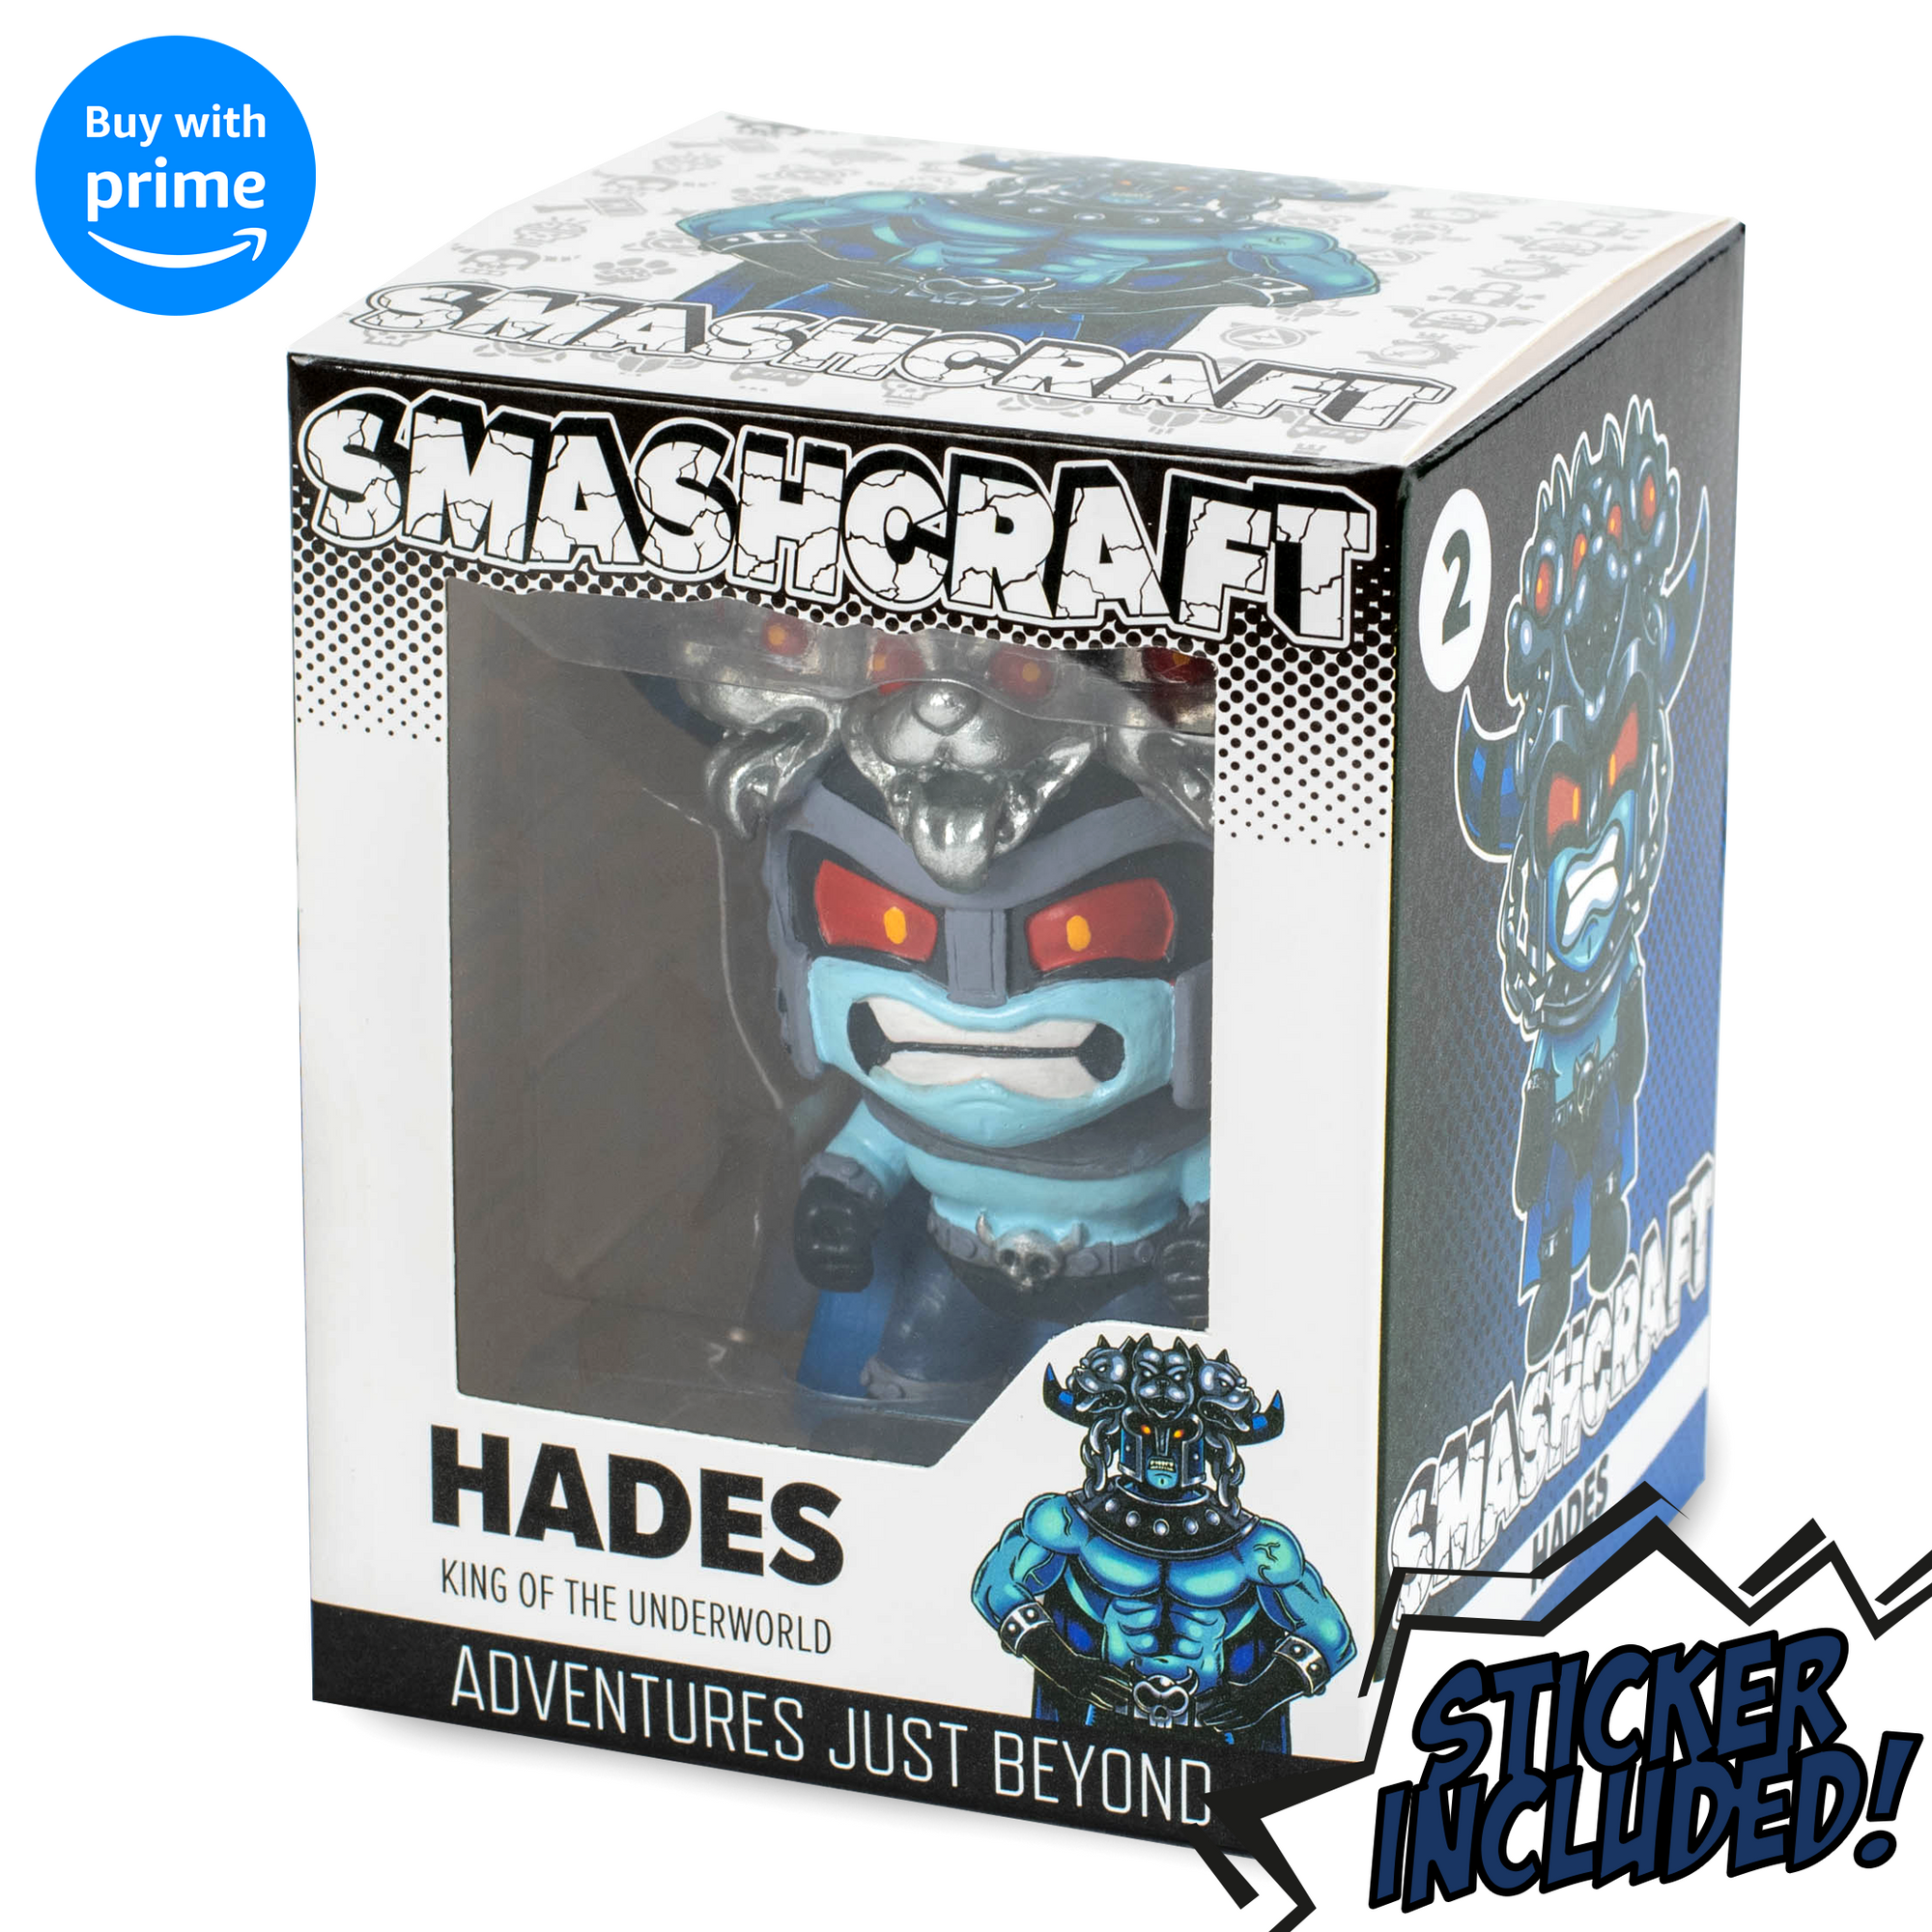 Smashcraft Hades collectors box, with back story and memorabilia Greek character sticker